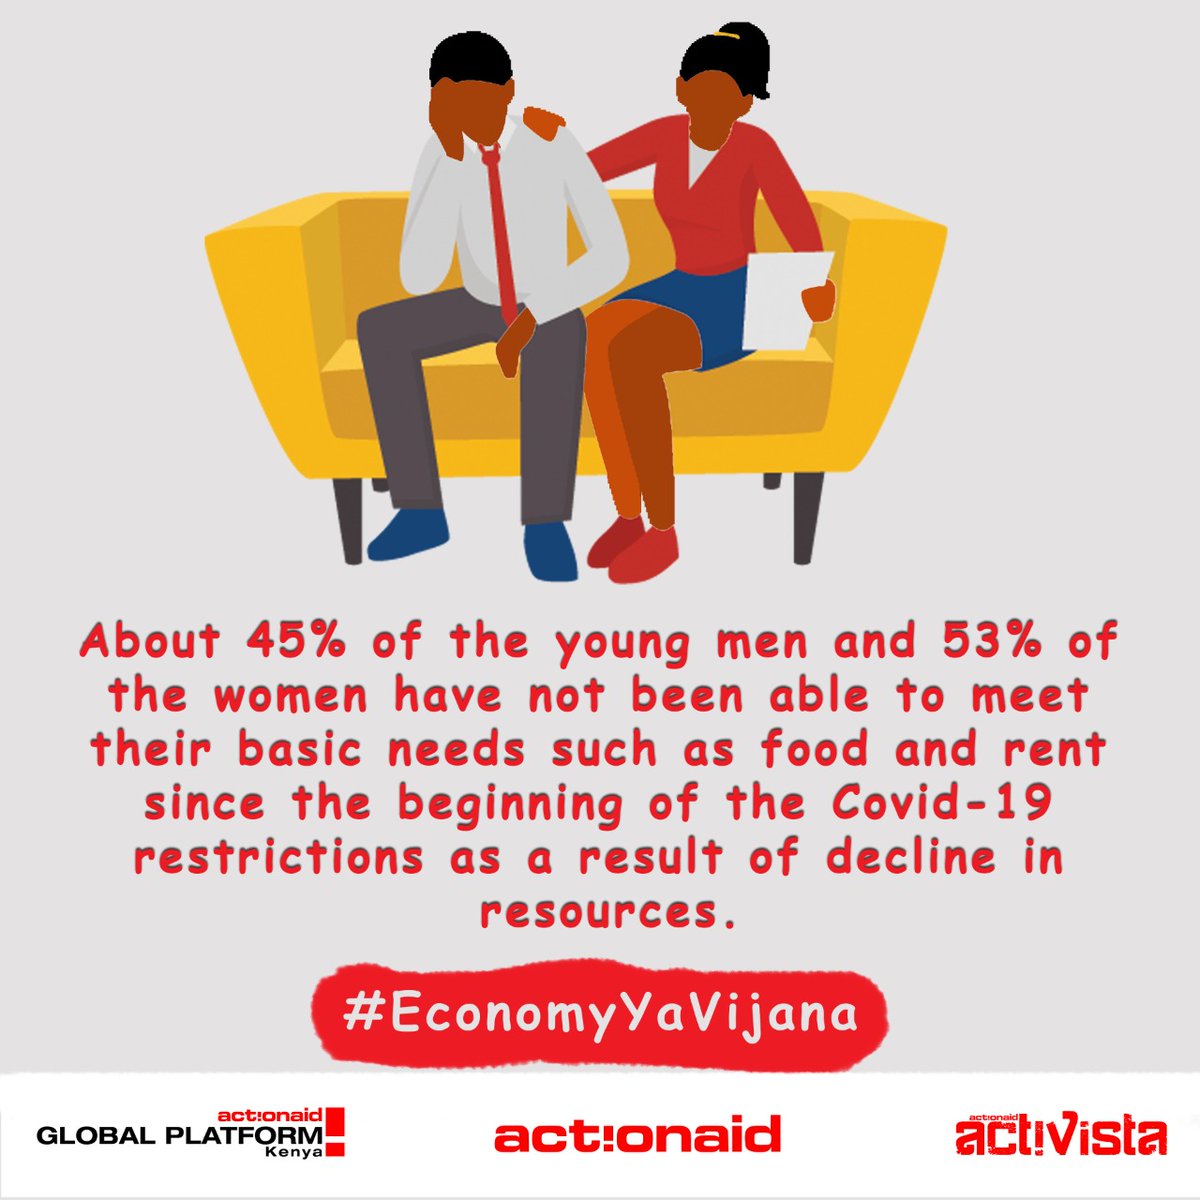 45% of young men and 53% of young women have not been able to meet their basic needs such as food and rent since the beginning of the Covid19 restrictions.

#EconomyYaVijana